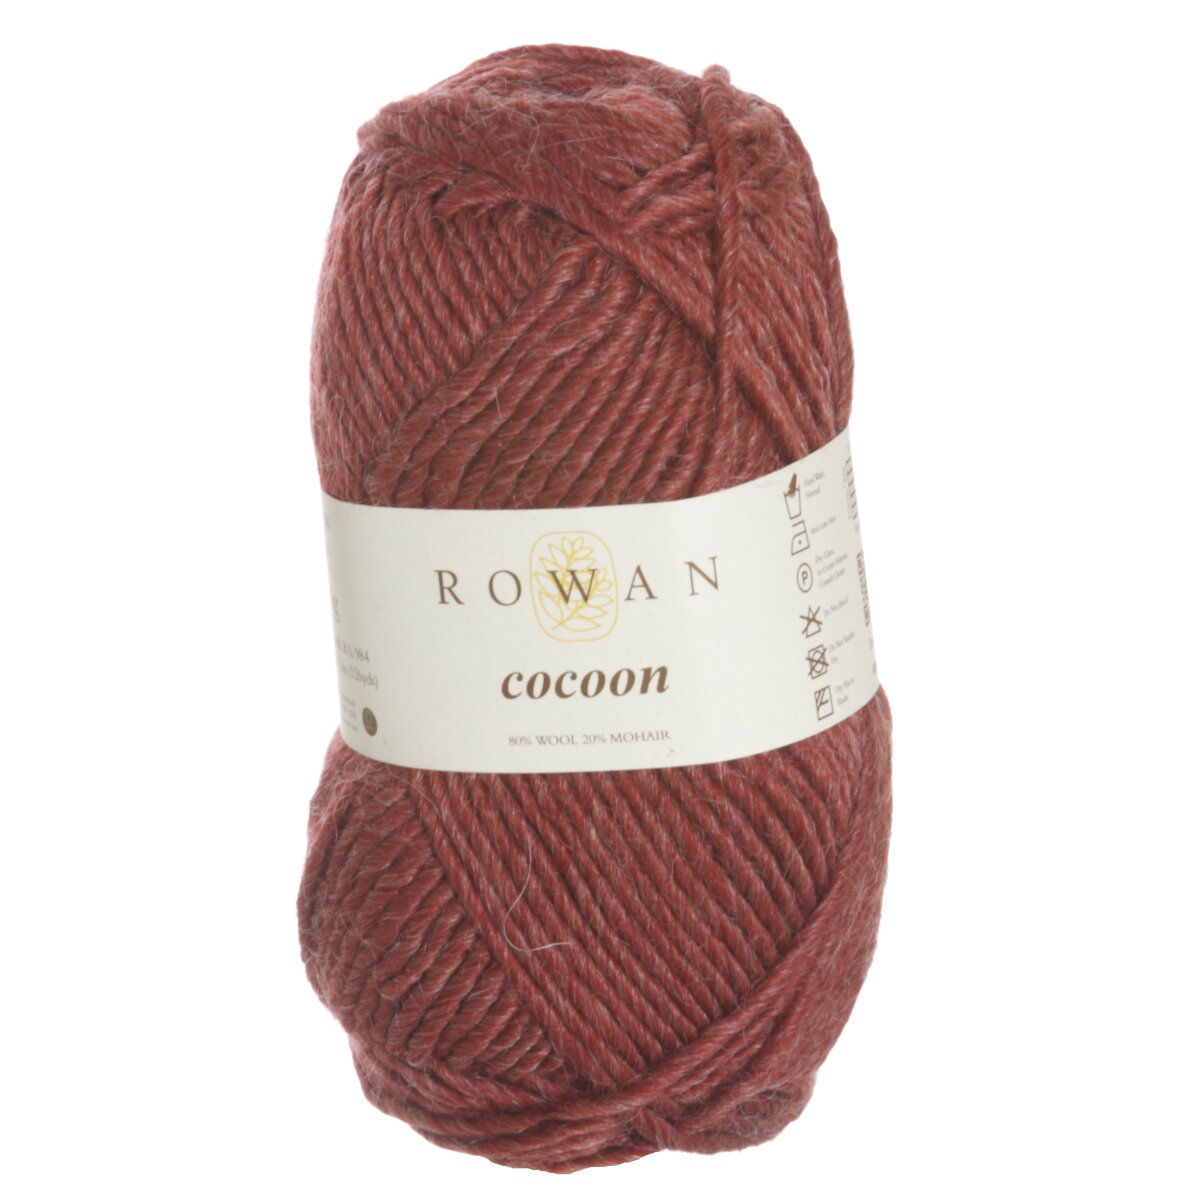 Rowan Cocoon Yarn - 818 - Quarry Tile (Discontinued) at ...